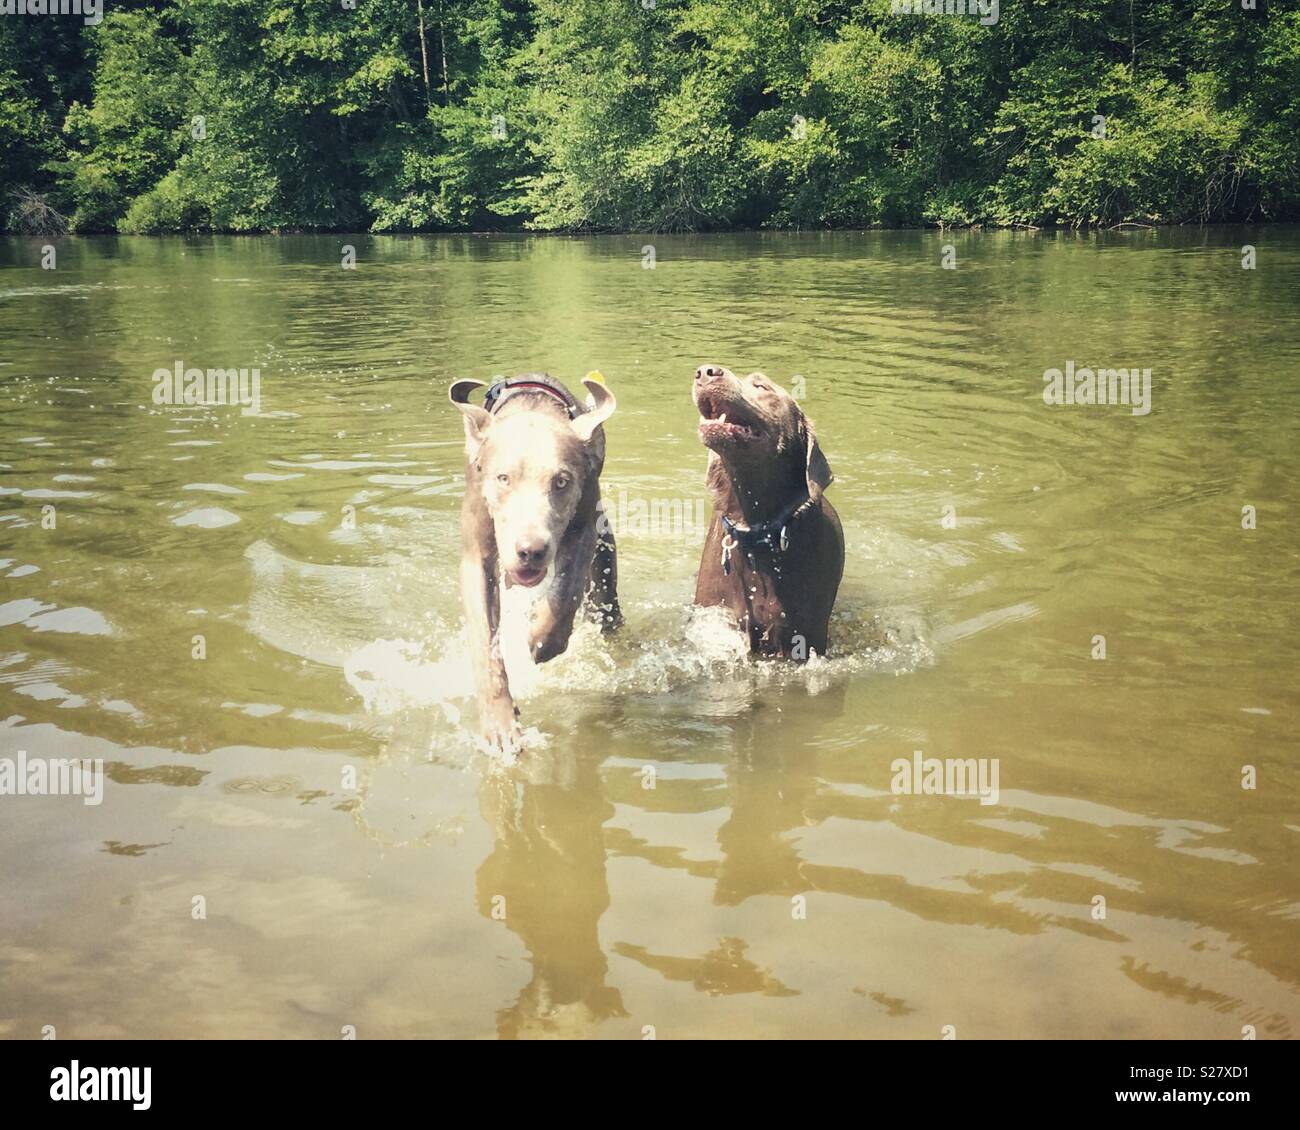 Two dogs playing in a lake Stock Photo